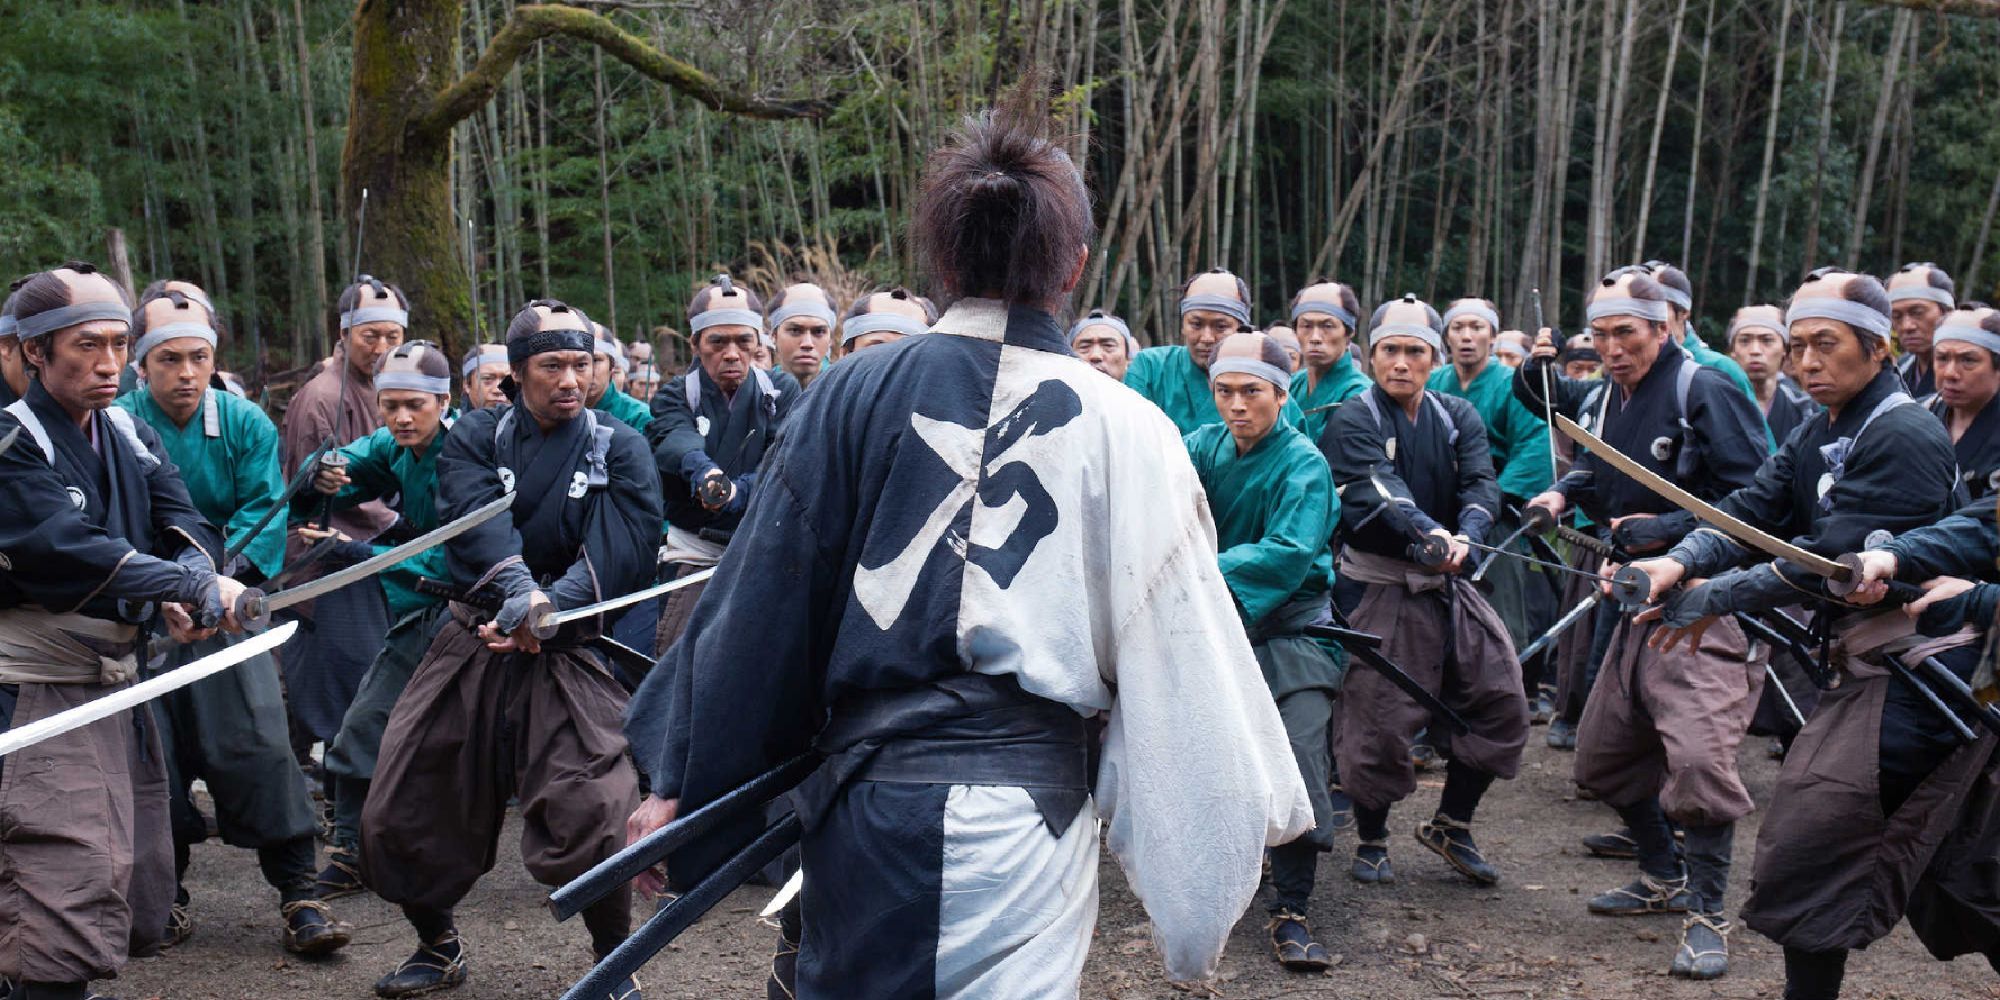 One warrior facing a large group in Blade of the Immortal